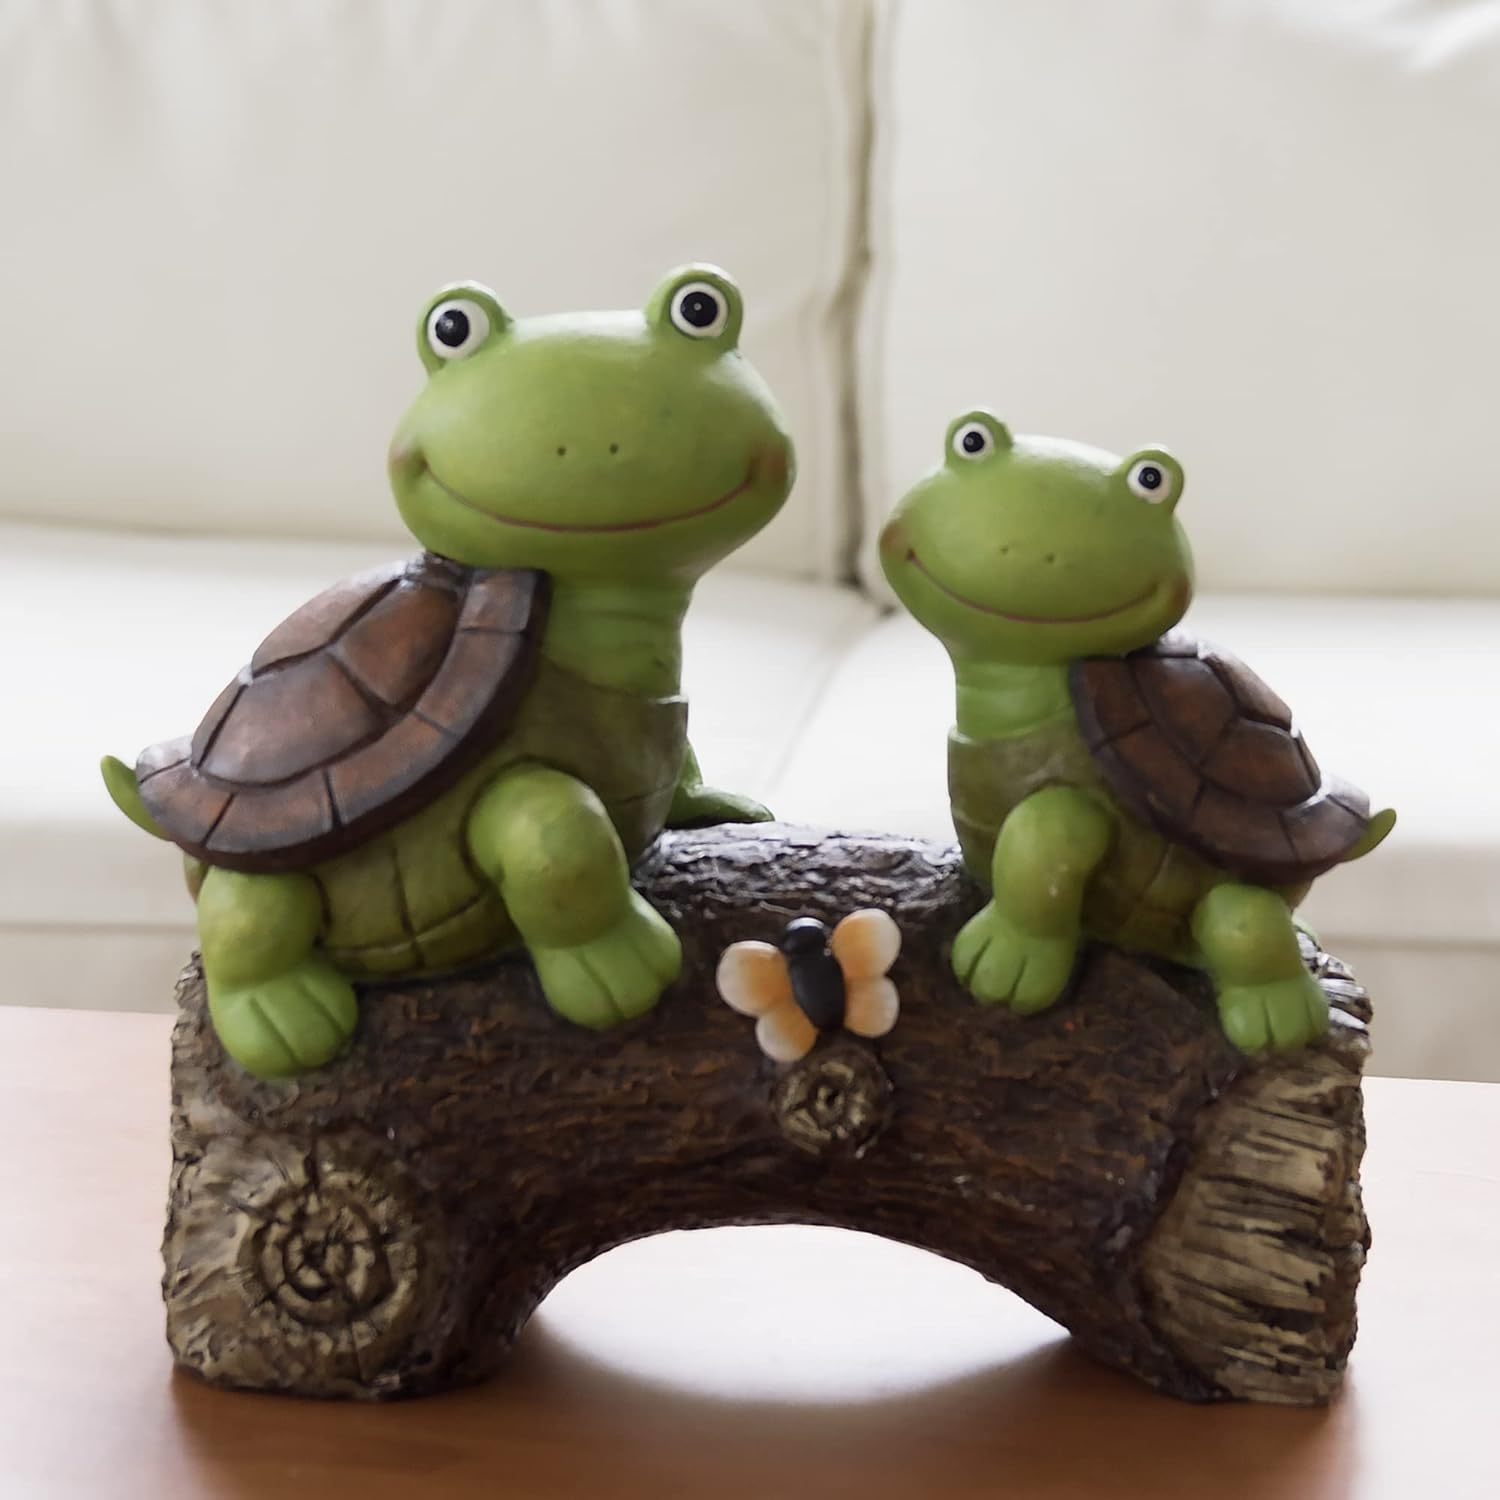 LA JOLIE MUSE Garden Statue Turtles Figurine - Cute Frog Face Turtles Animal Sculpture with Solar LED Lights for Indoor Outdoor Spring Decora